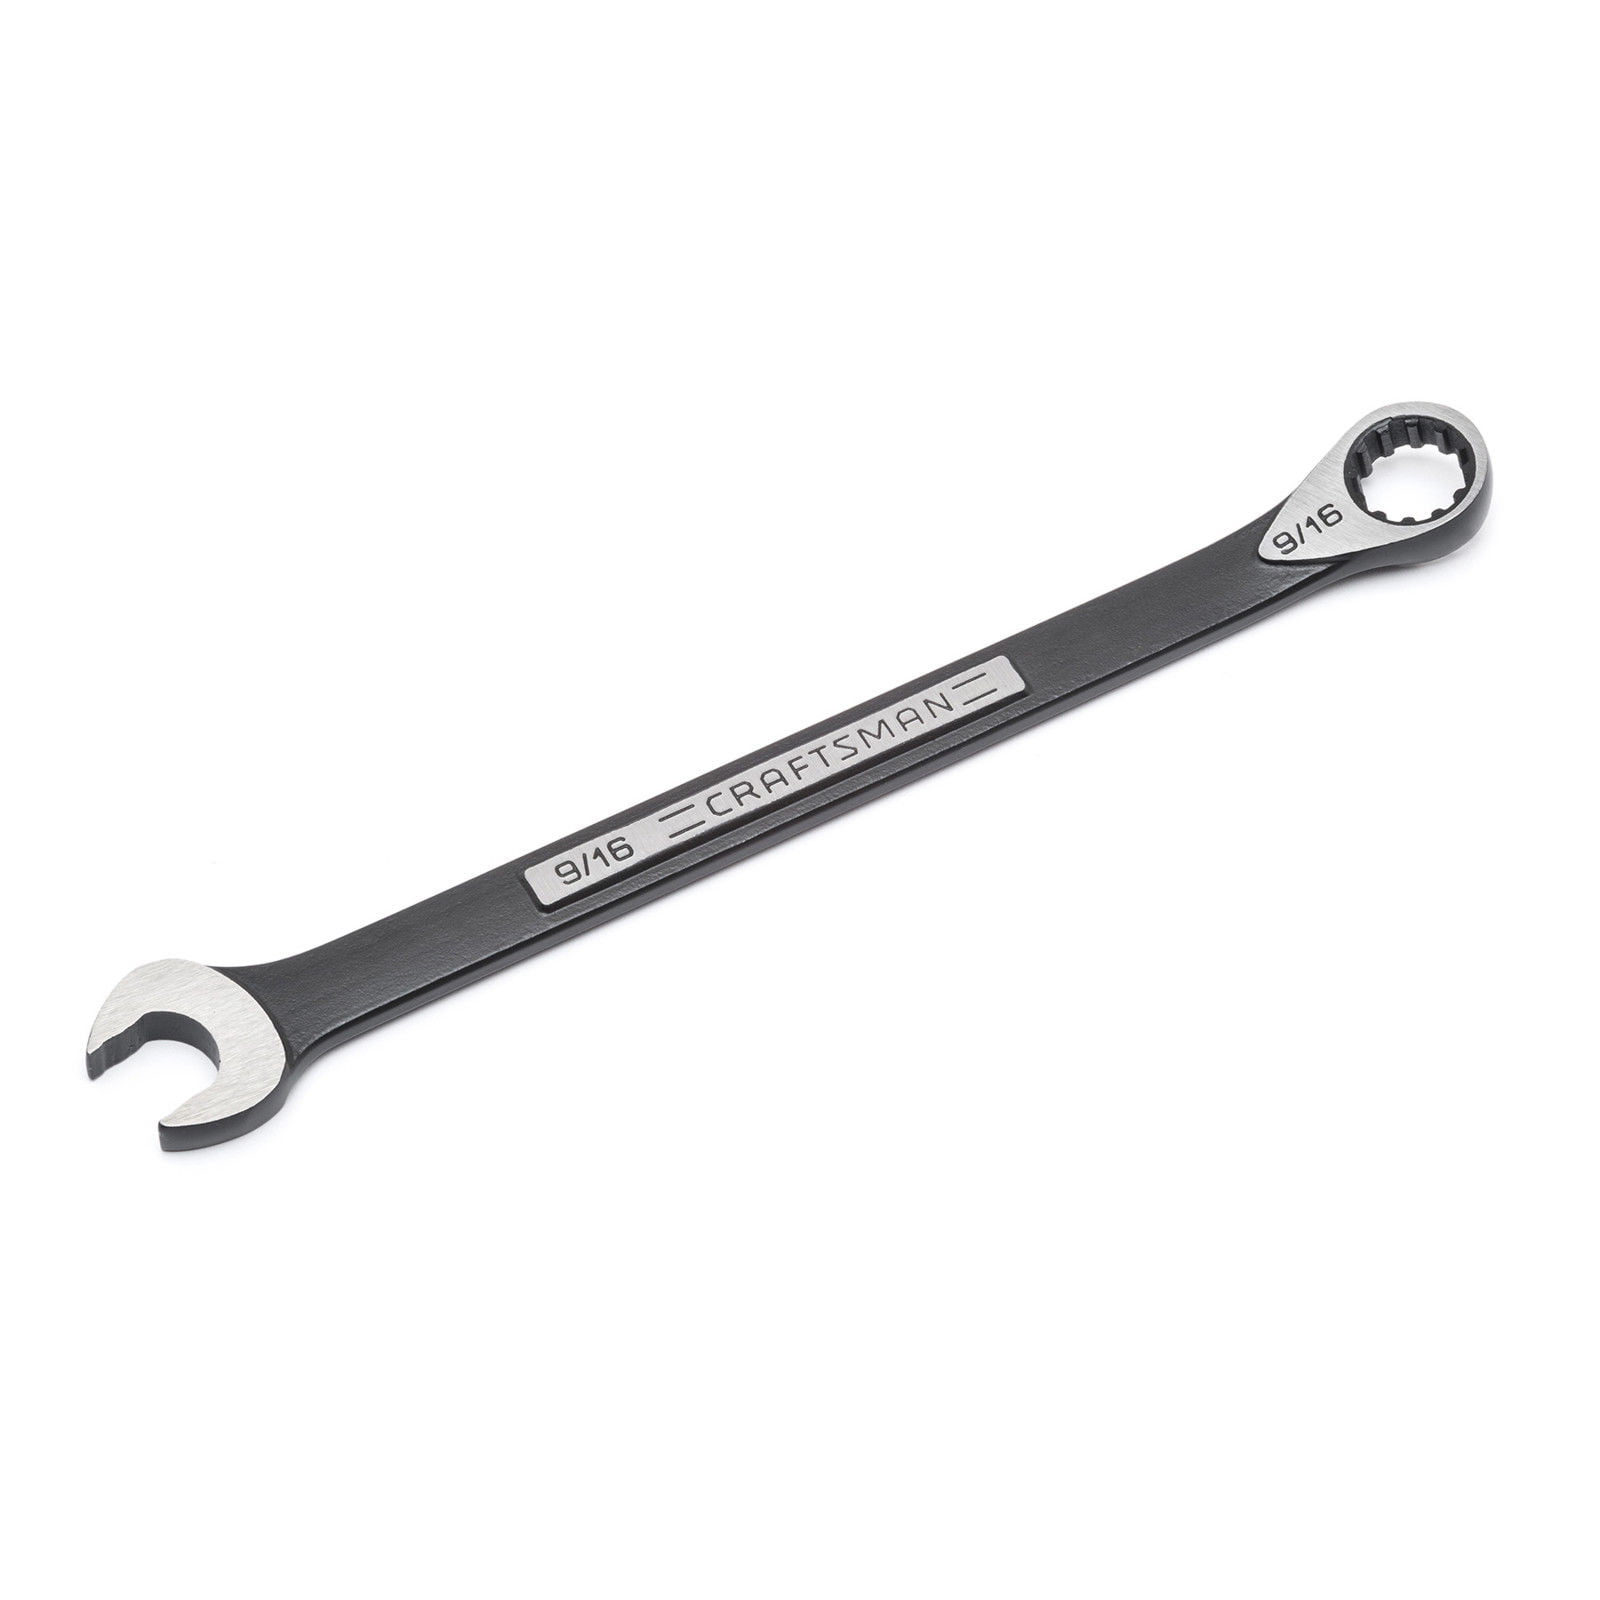 1/4 Craftsman Universal Combination Wrench Inch SAE